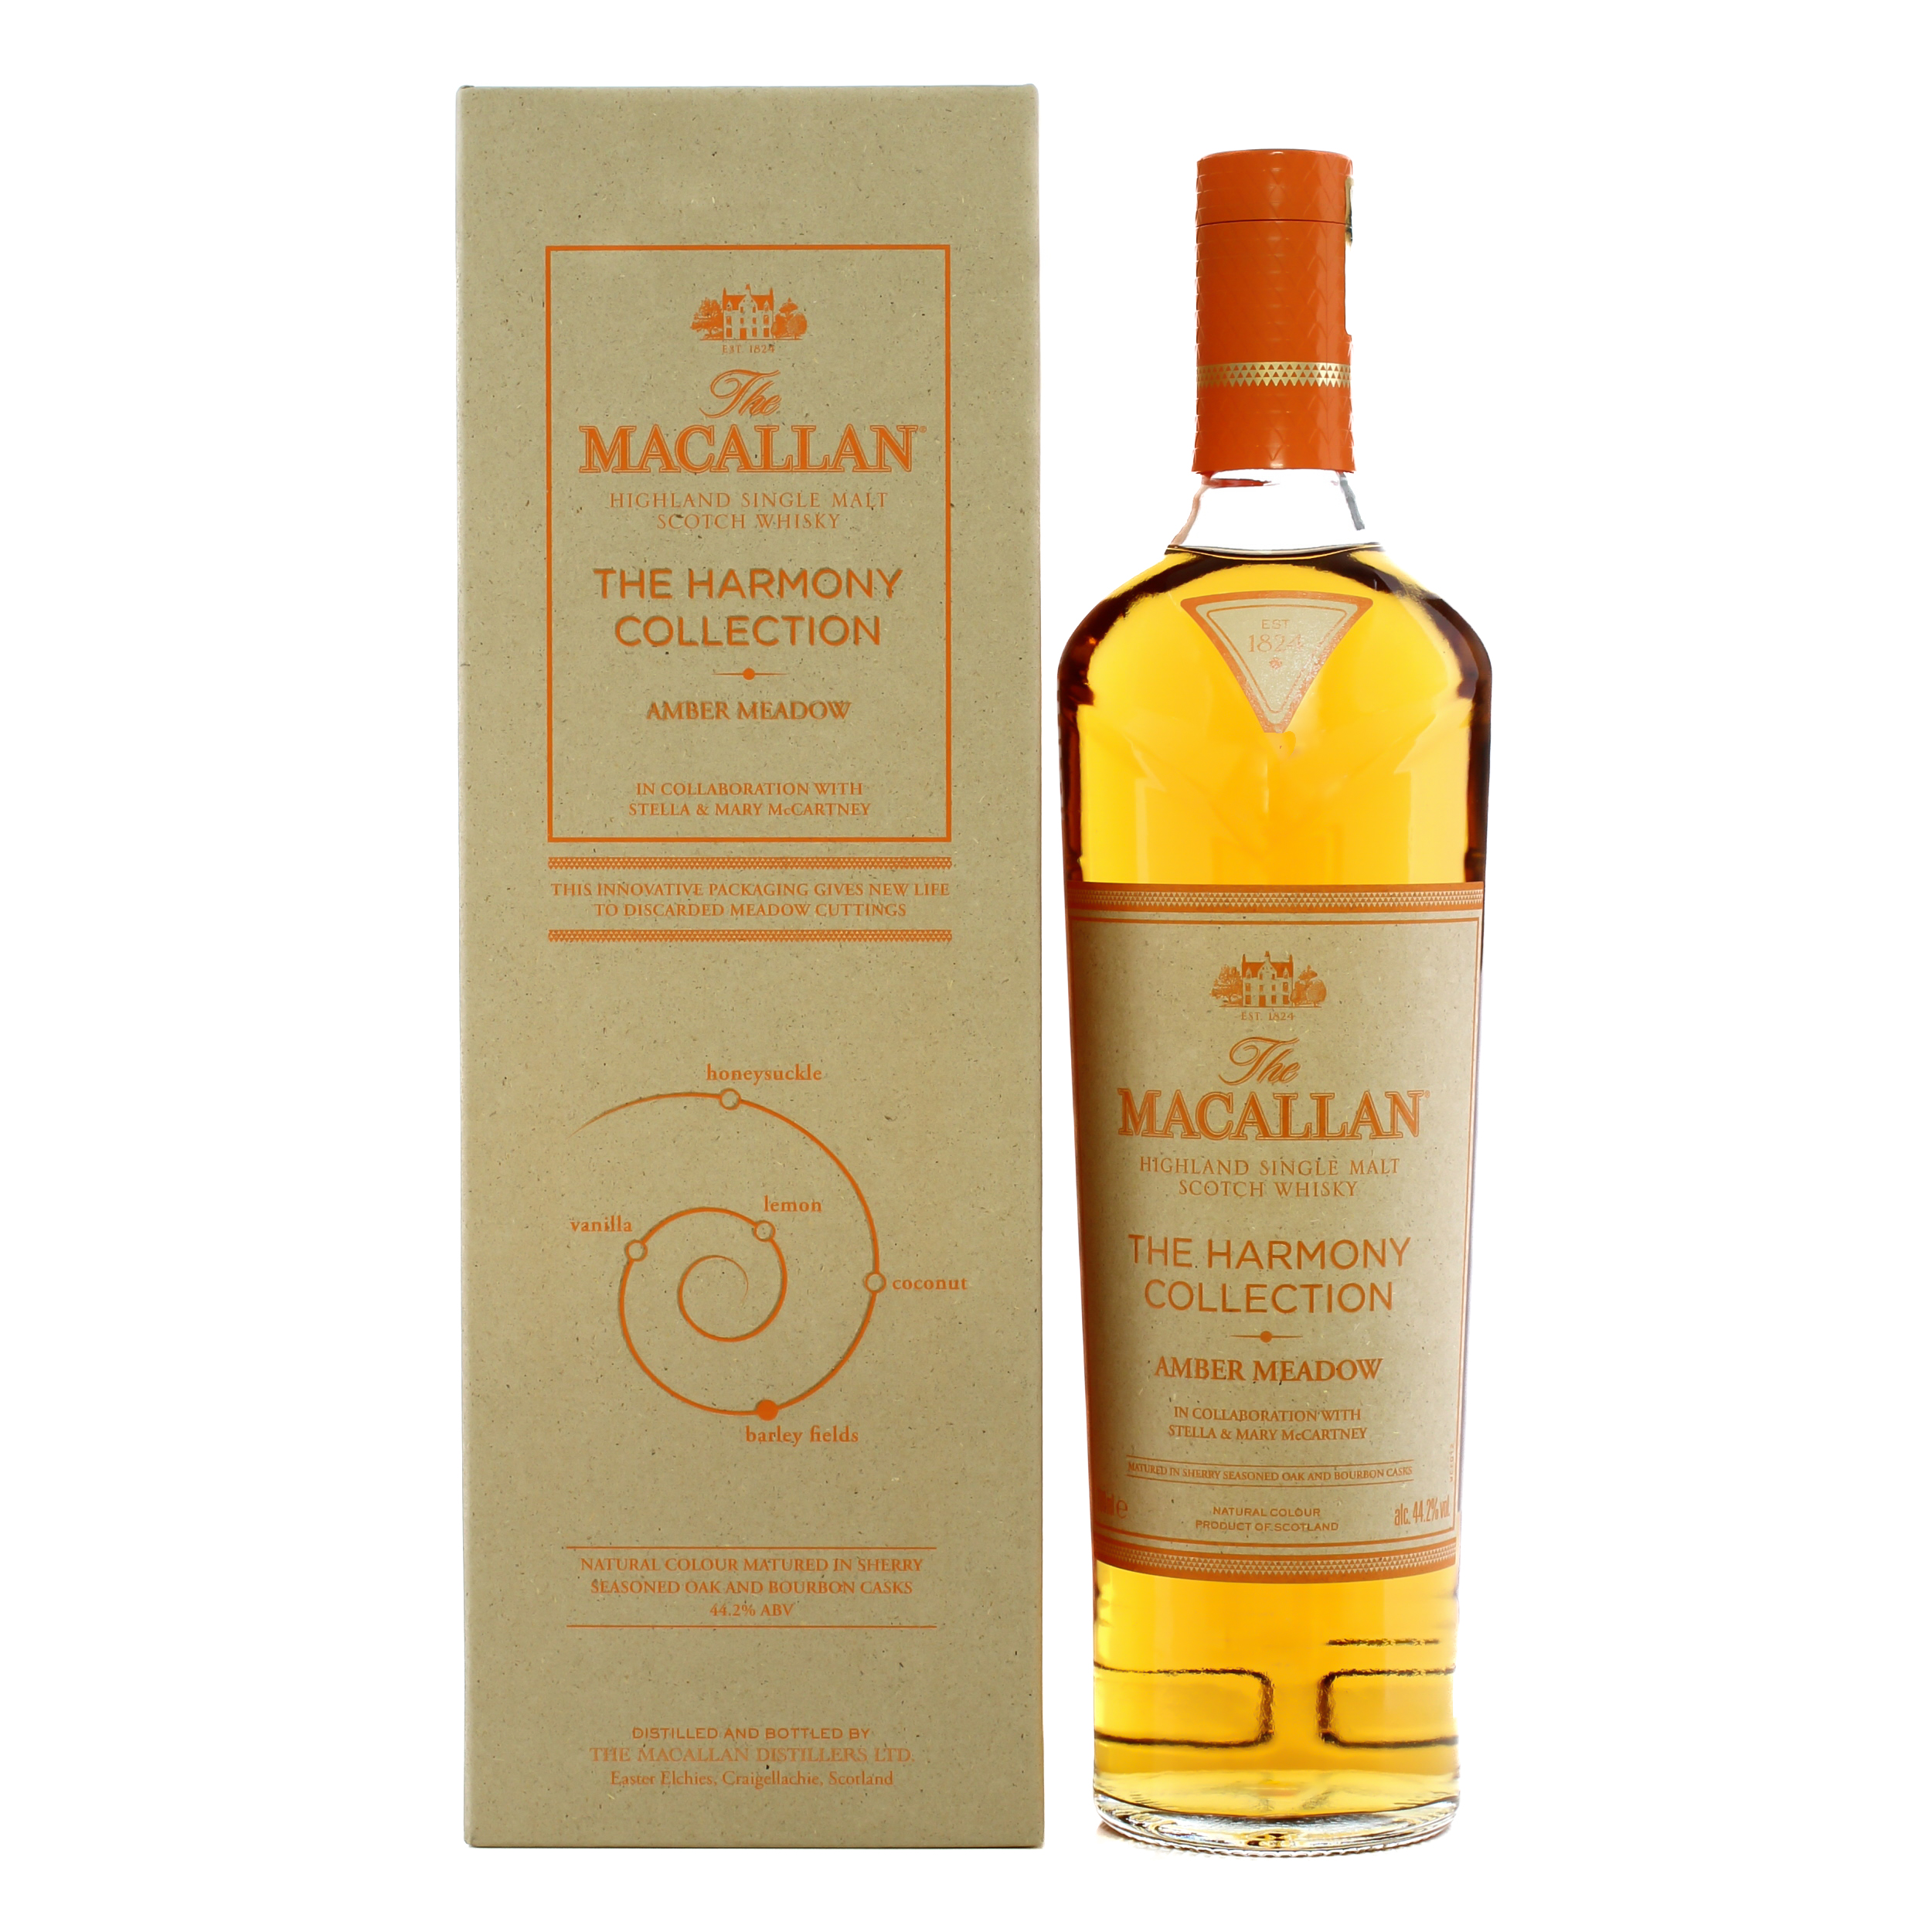 Macallan – The Harmony Collection Amber Meadow 